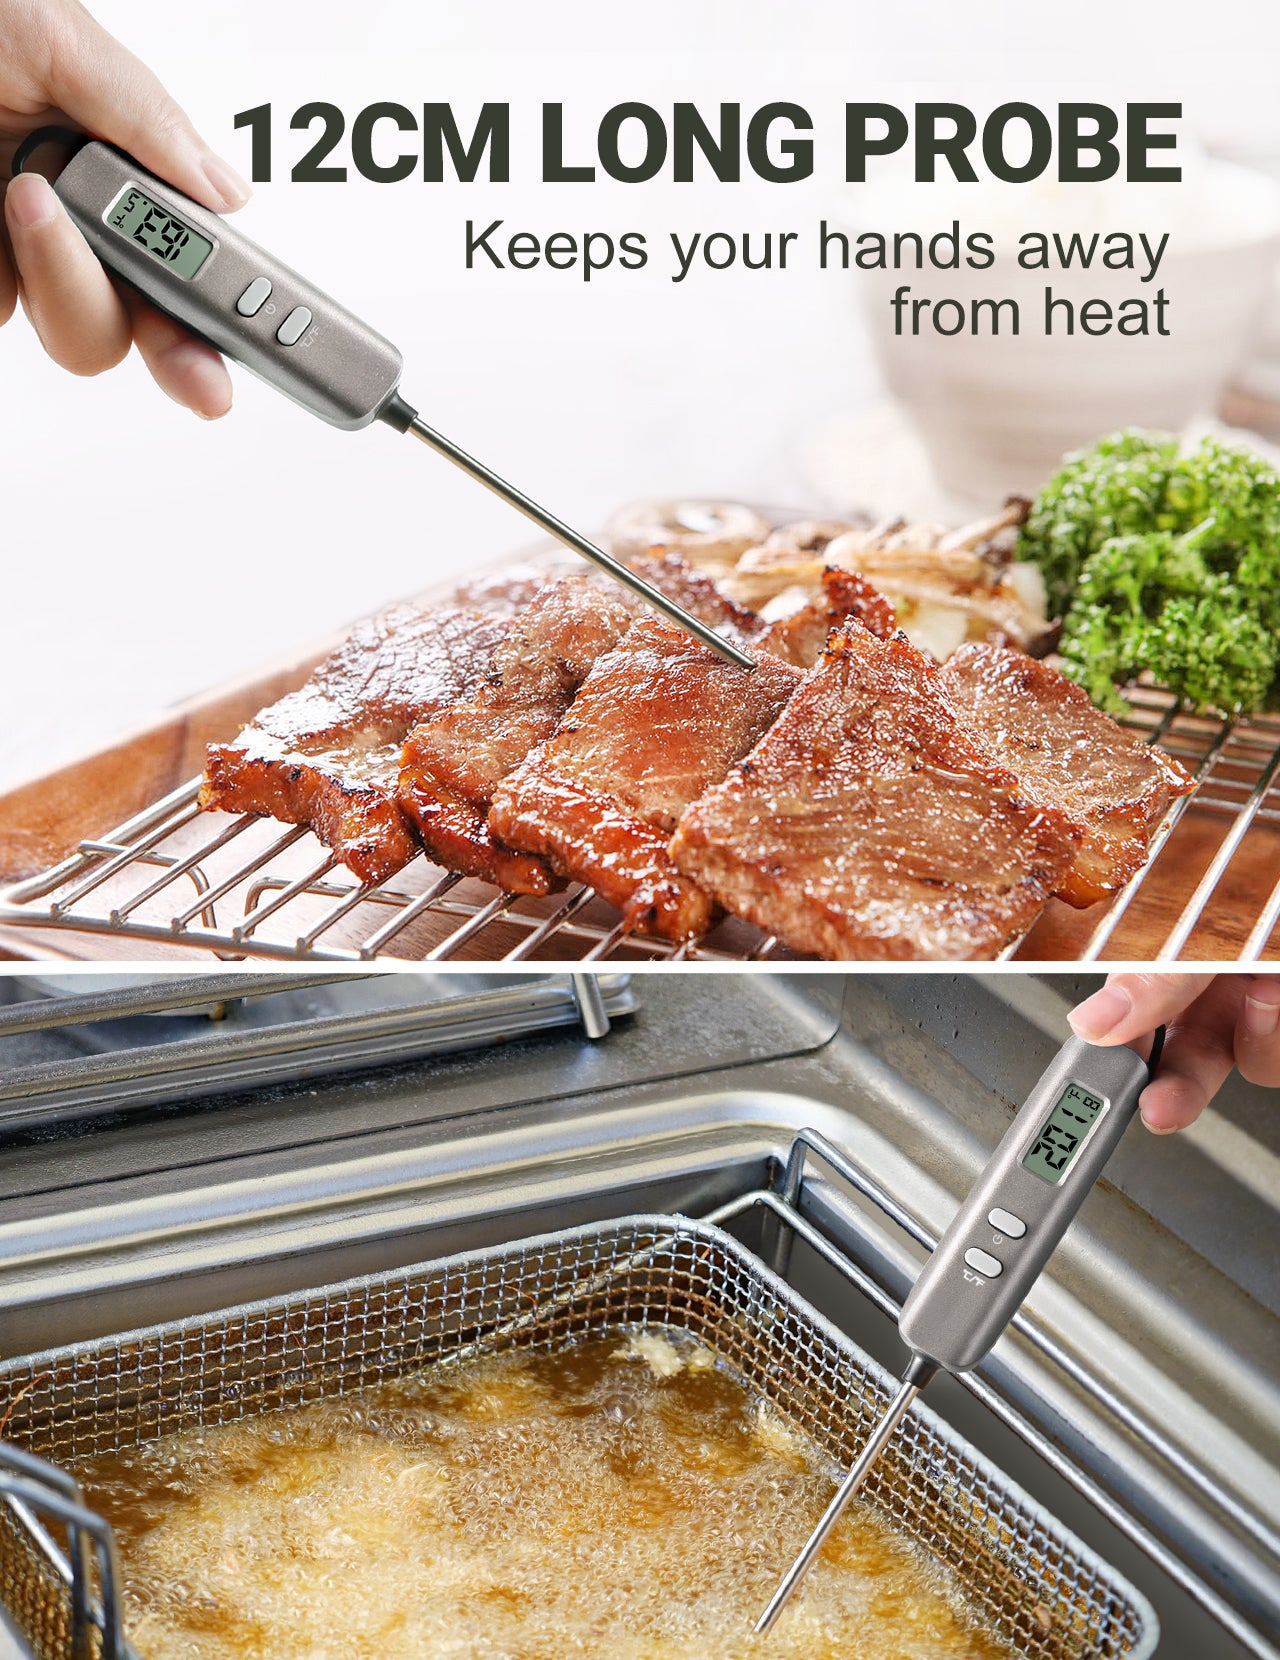 Kitchen Meat Digital Thermometer  Electronic Cooking Thermometer